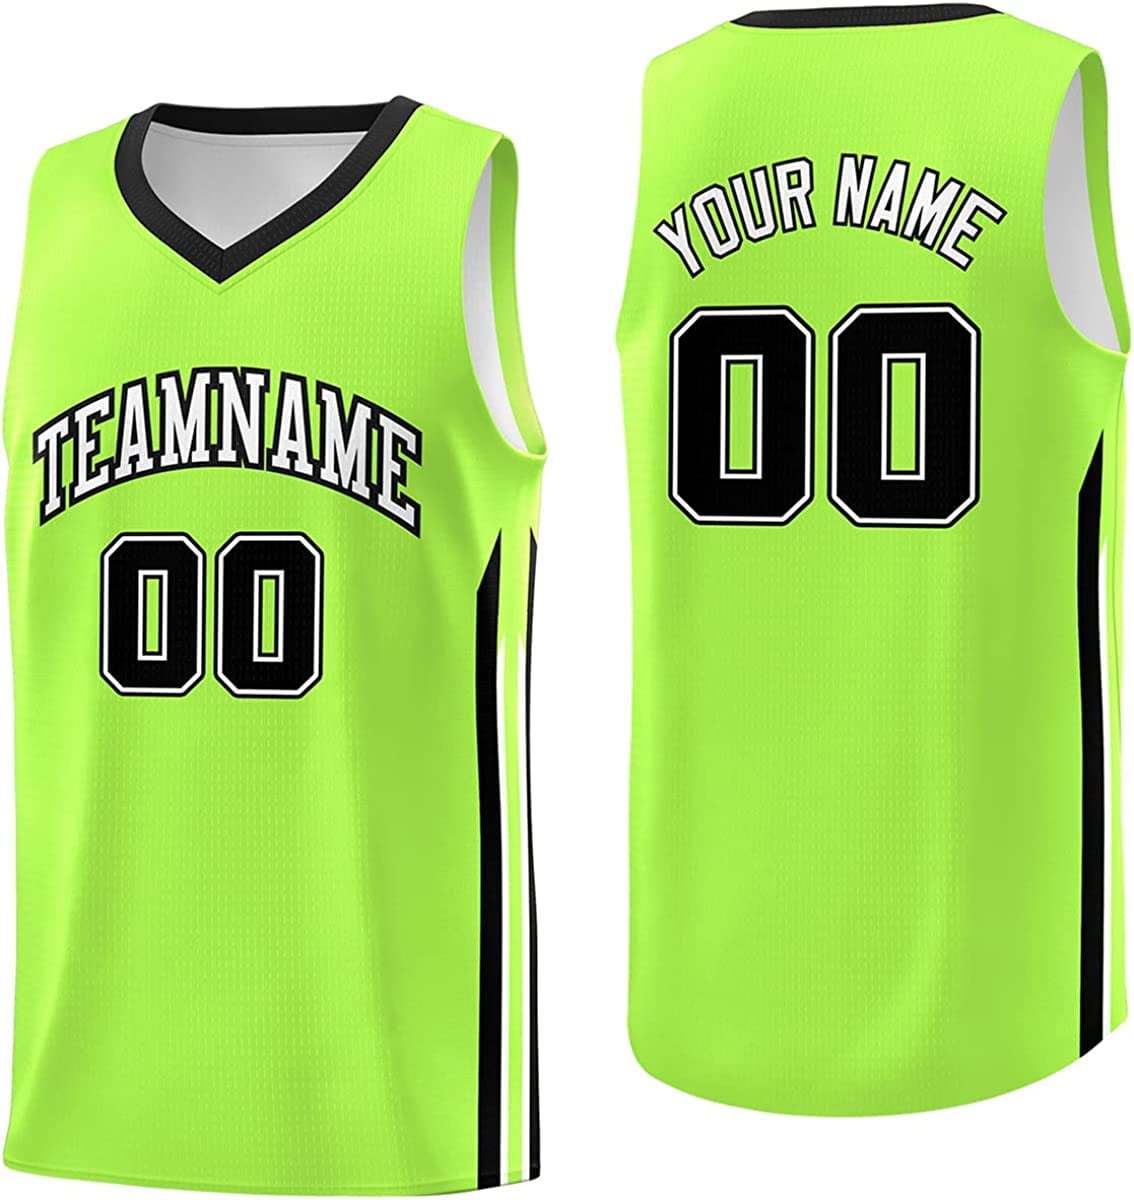  Custom Basketball Jersey for Men &Boy,Blank Athletic Uniform  Personalized Printed Team Name Number Logo : Clothing, Shoes & Jewelry